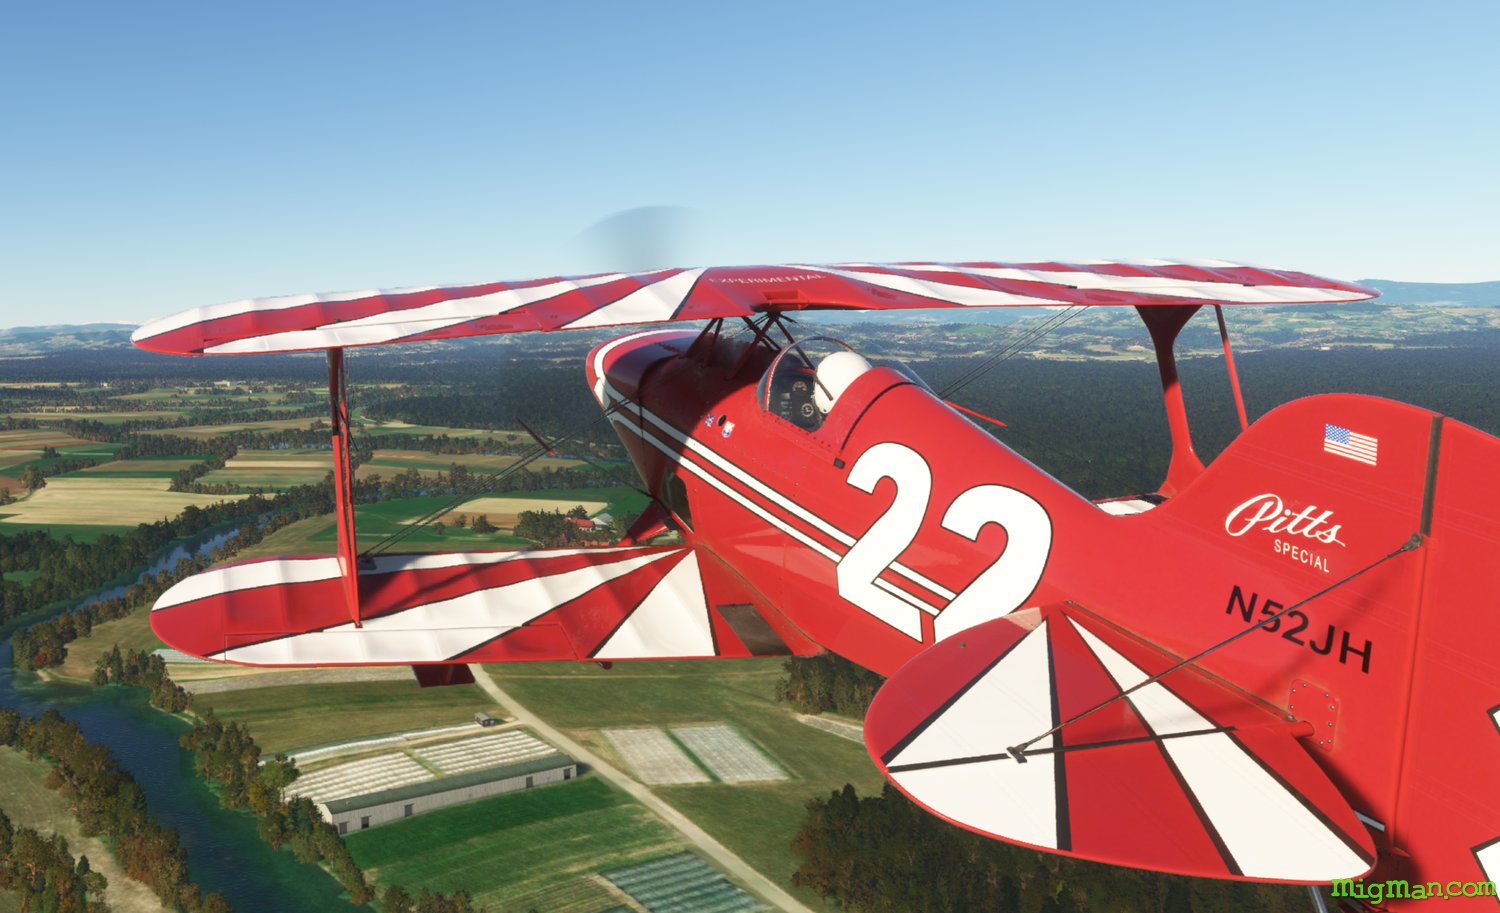 Pitts S-1C "Nice and EZ"